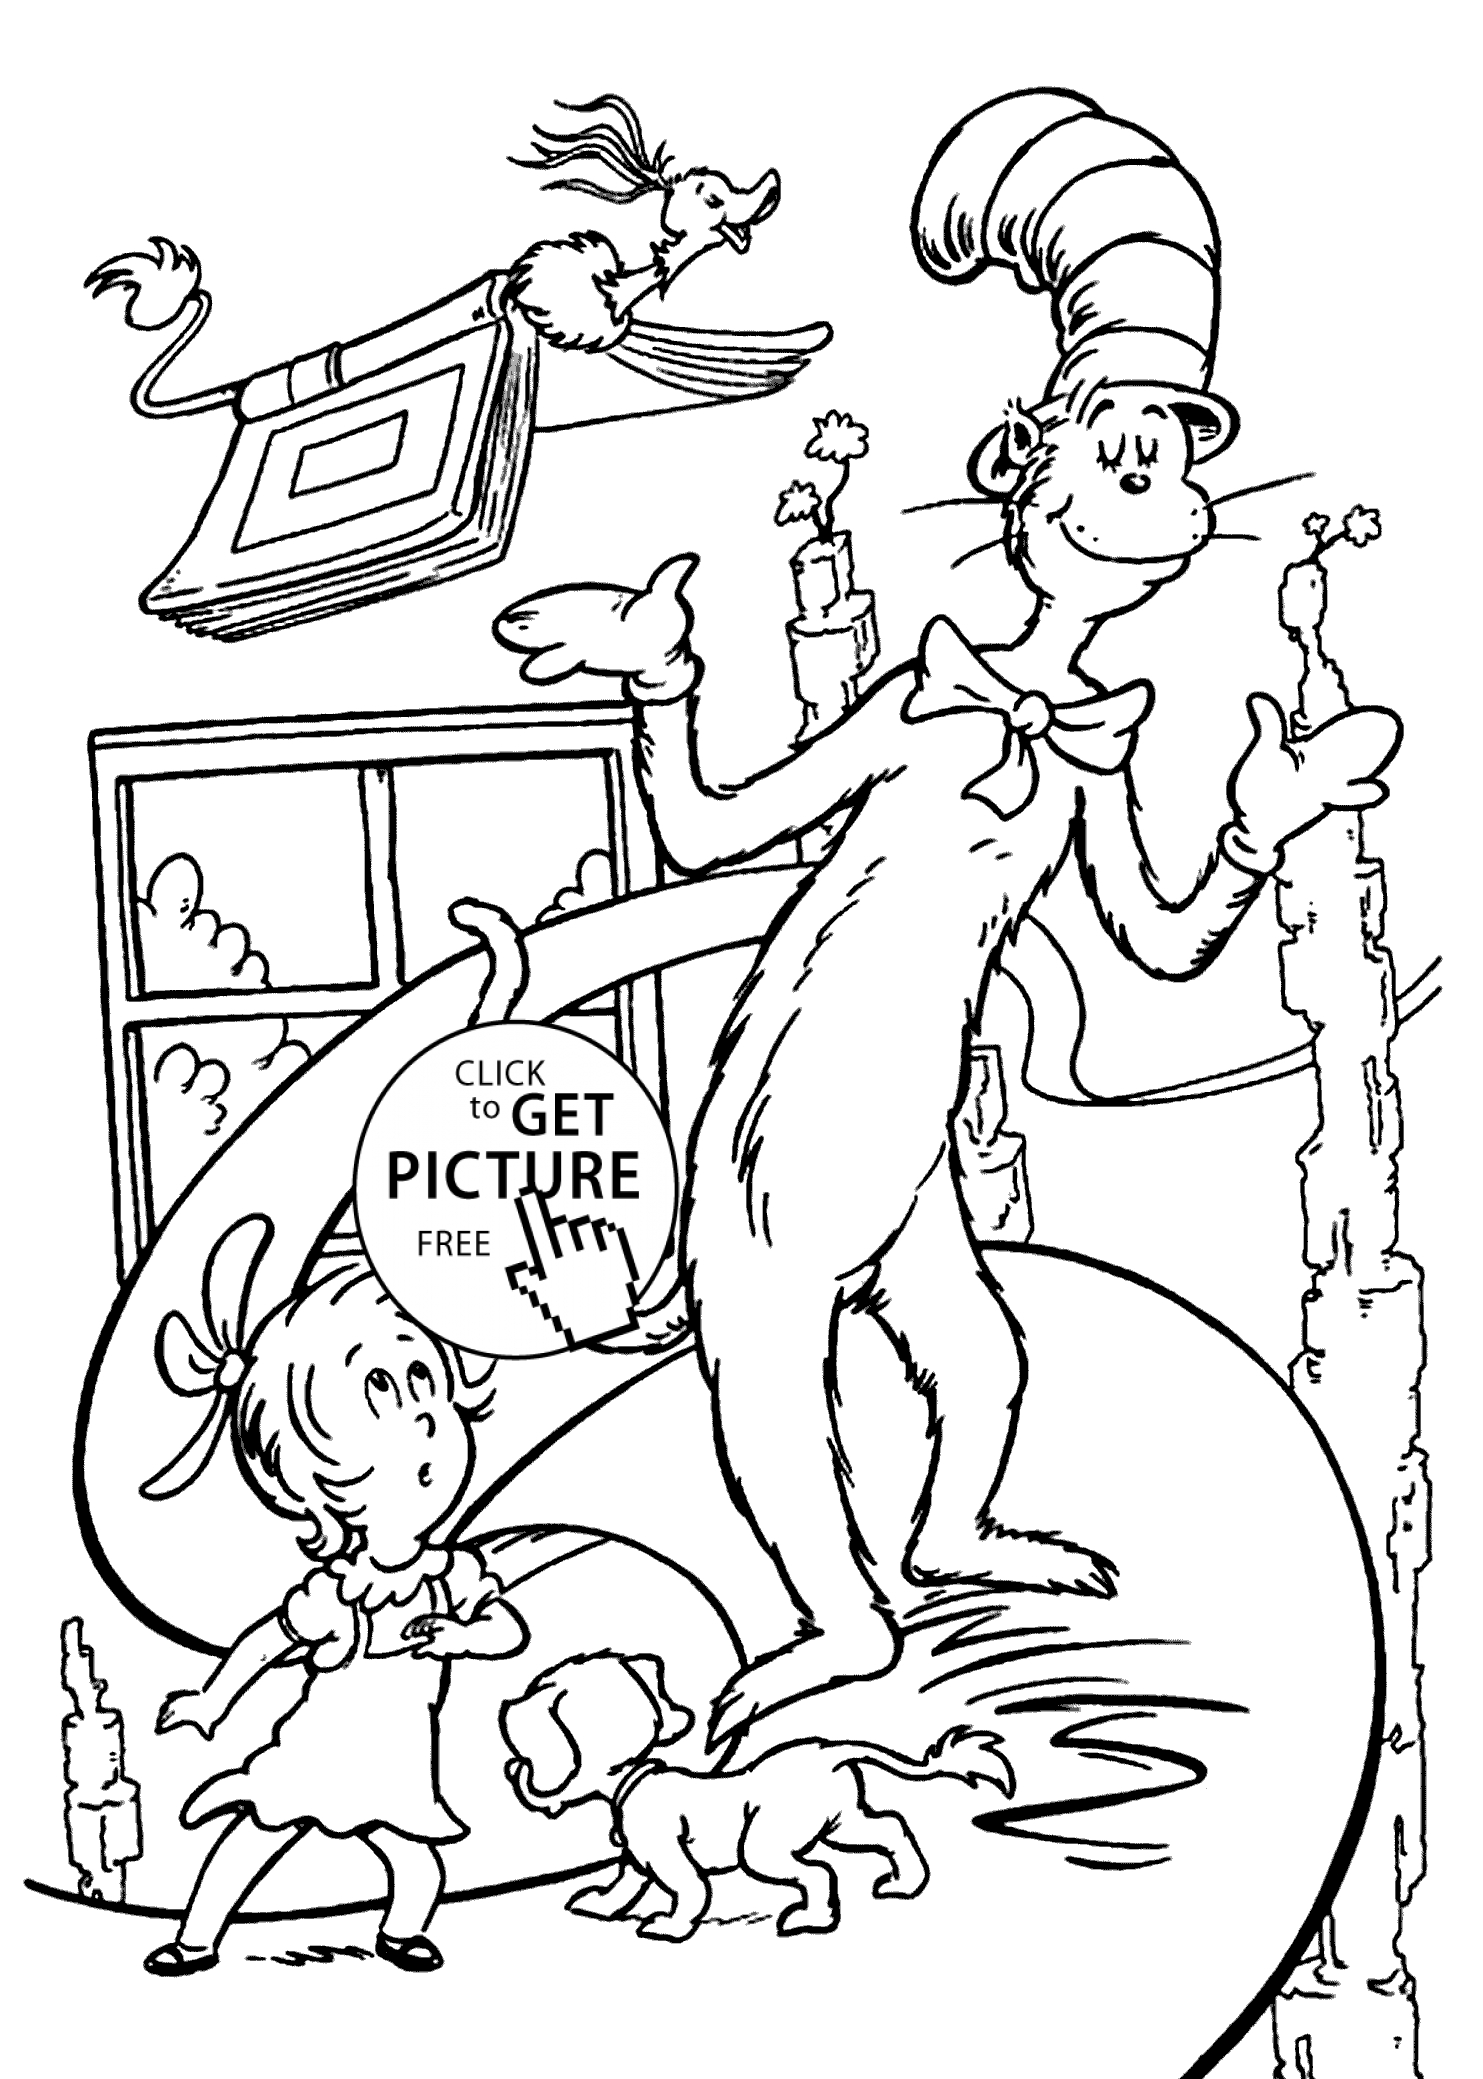 Cat In The Hat Coloring Page Funny At In The Hat Coloring Pages For Kids Printable Free Dr